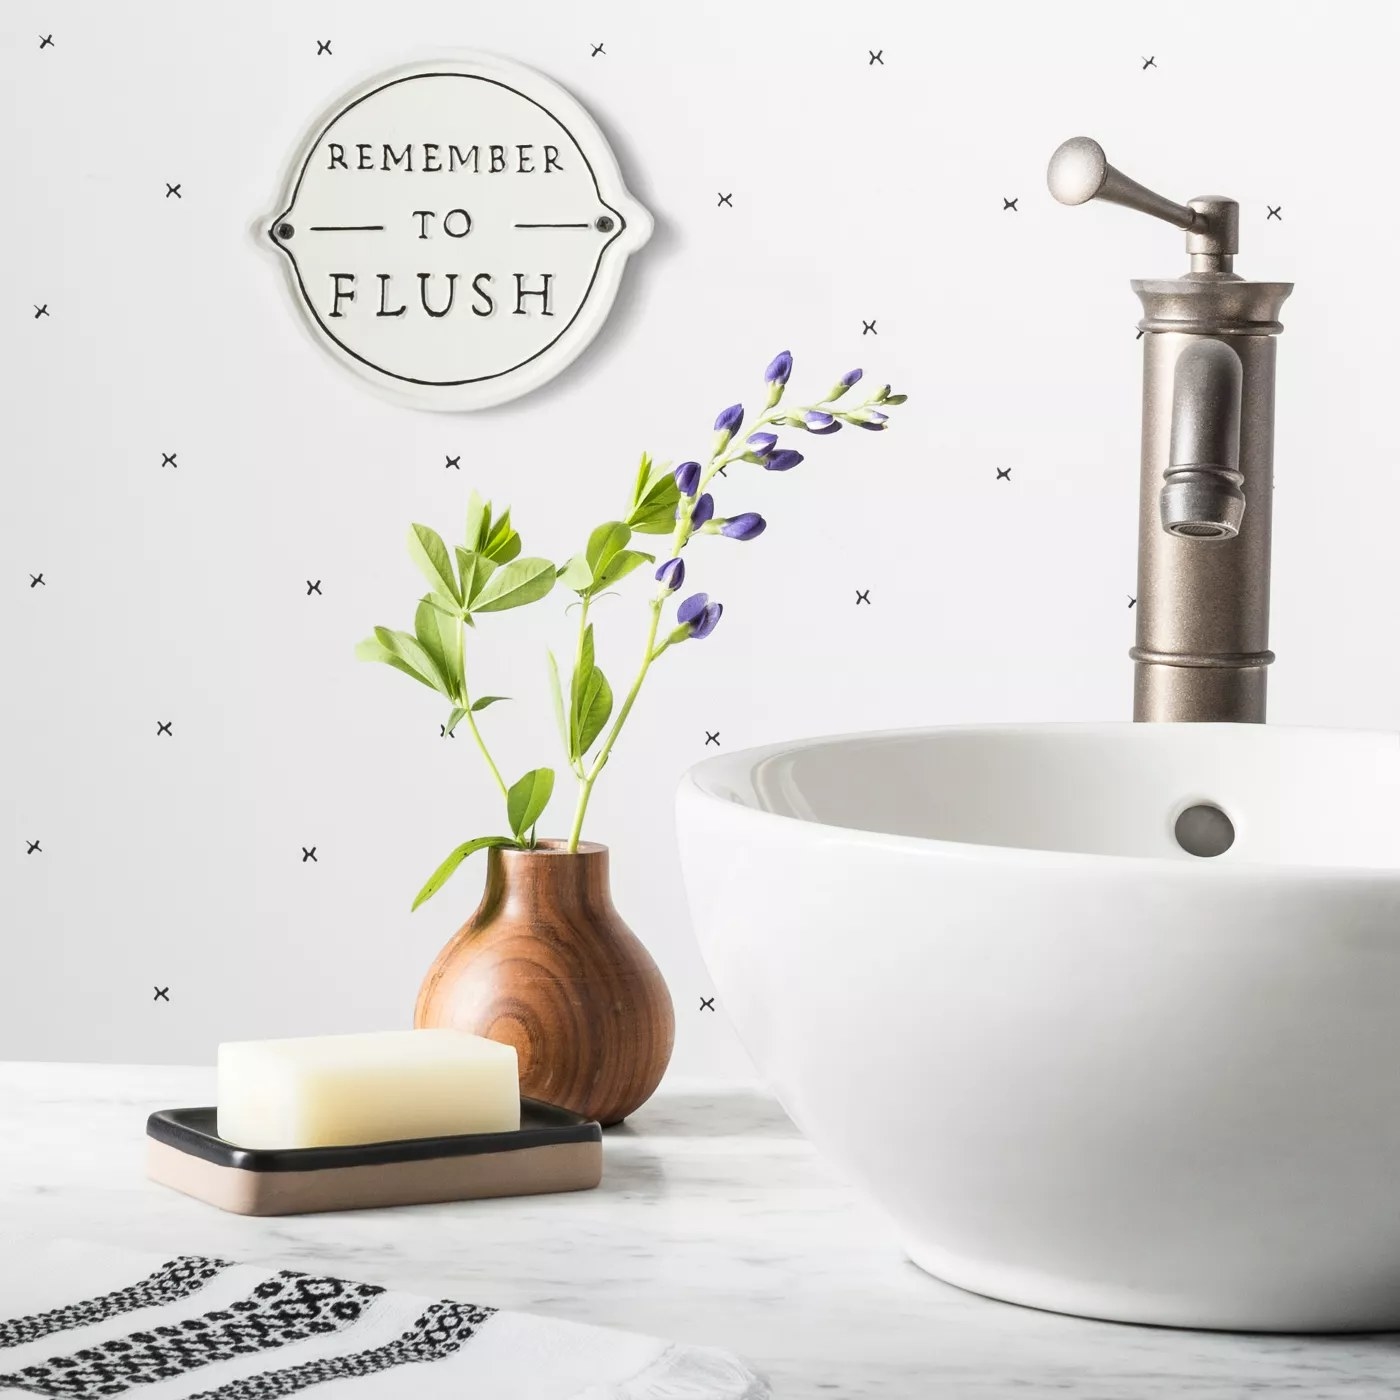 The white lemon-shaped sign says &quot;REMEMBER TO FLUSH&quot; in black serif font and is hung in a white bathroom with small pops of color from plants, decor and supplies